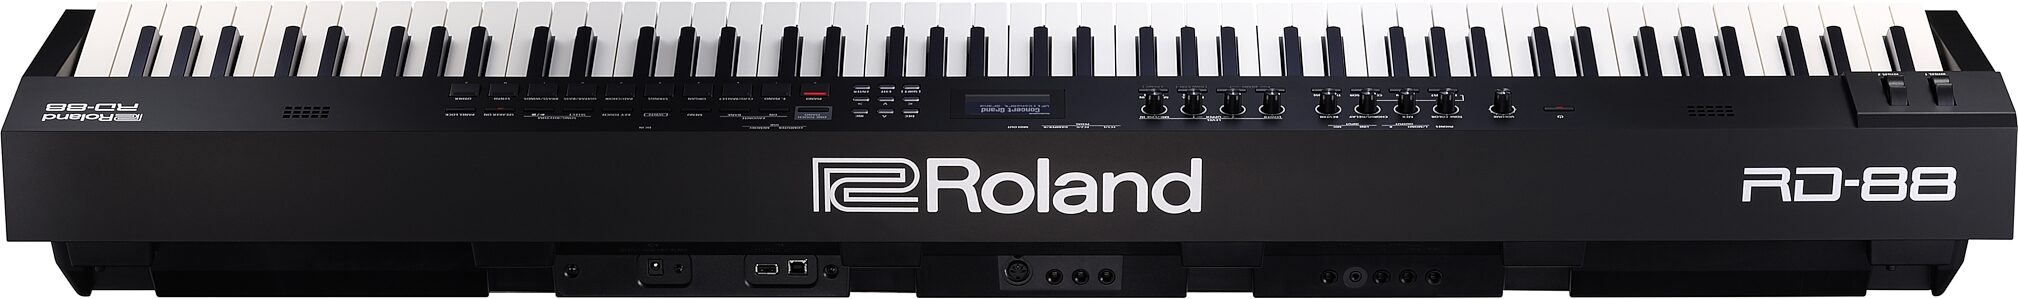 Roland RD-88 Digital Stage Piano | zZounds